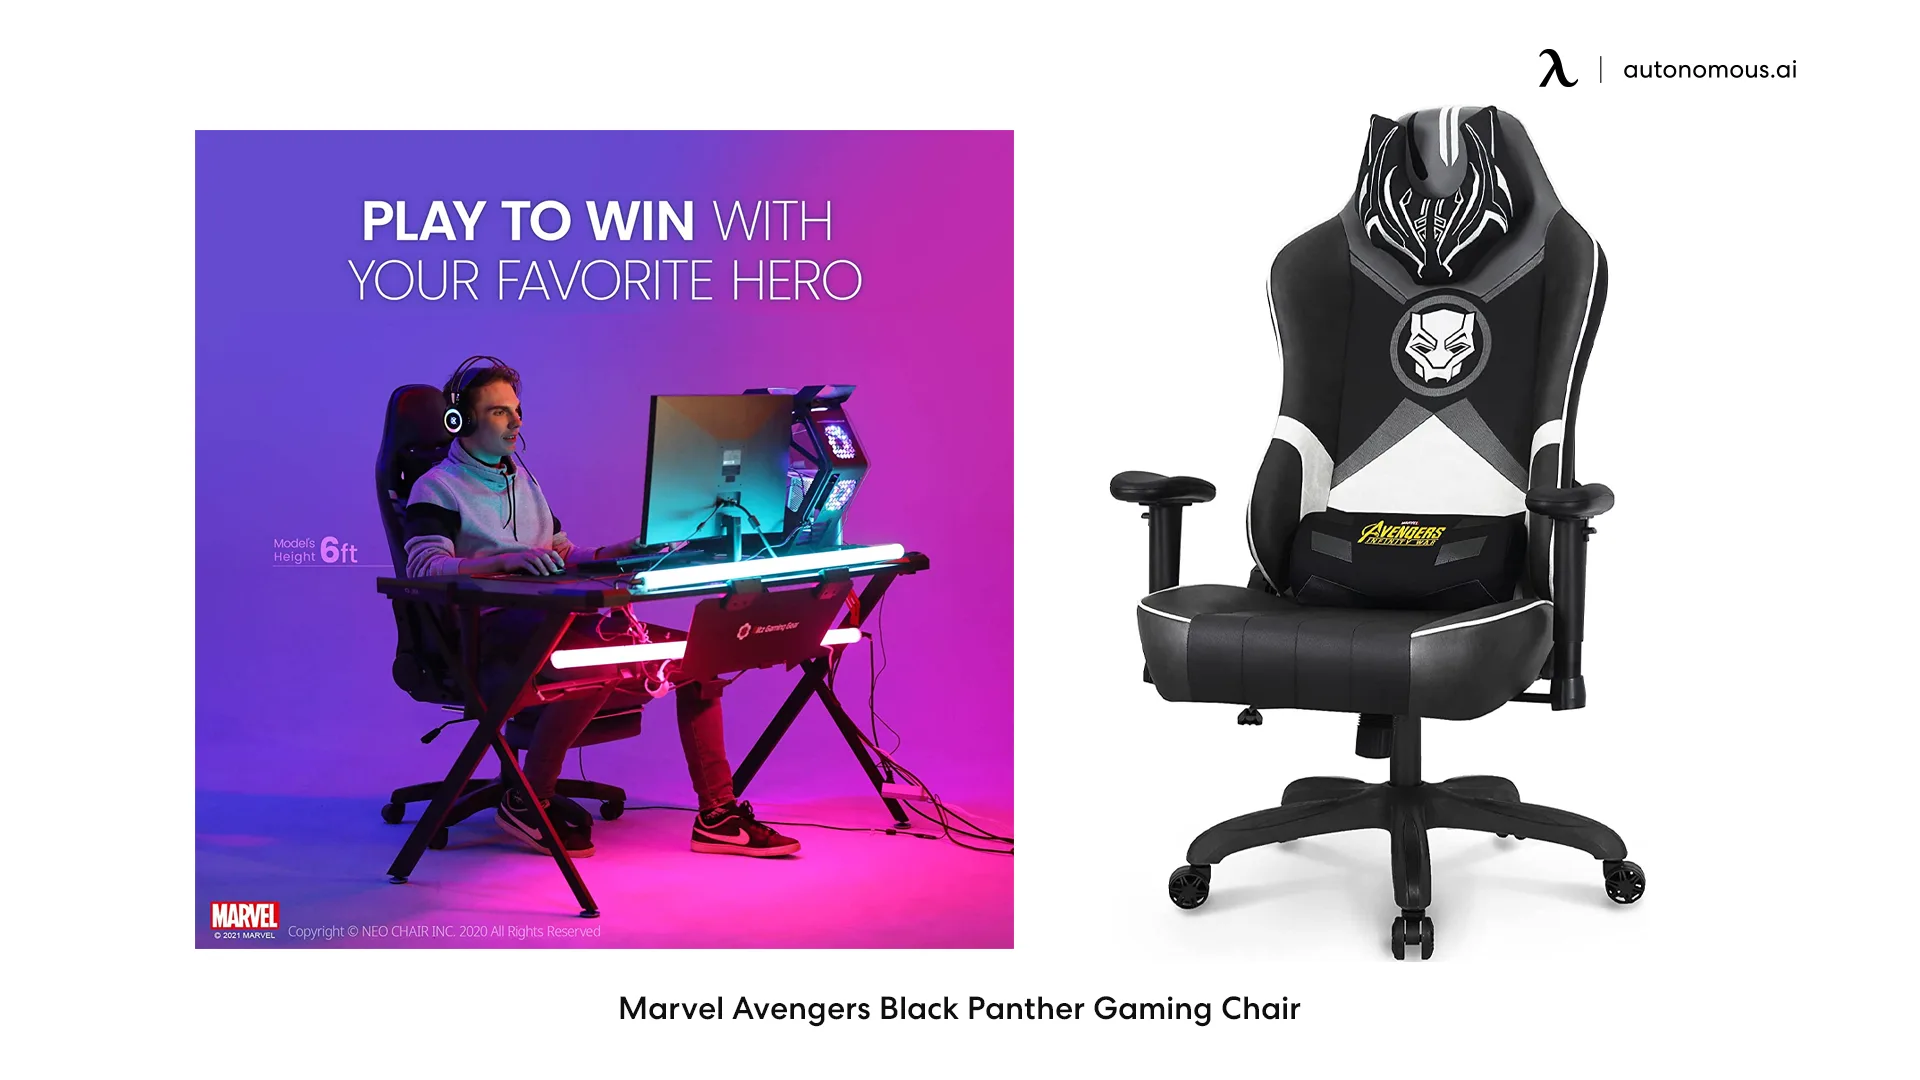 Marvel Avengers Black Panther Gaming Chair